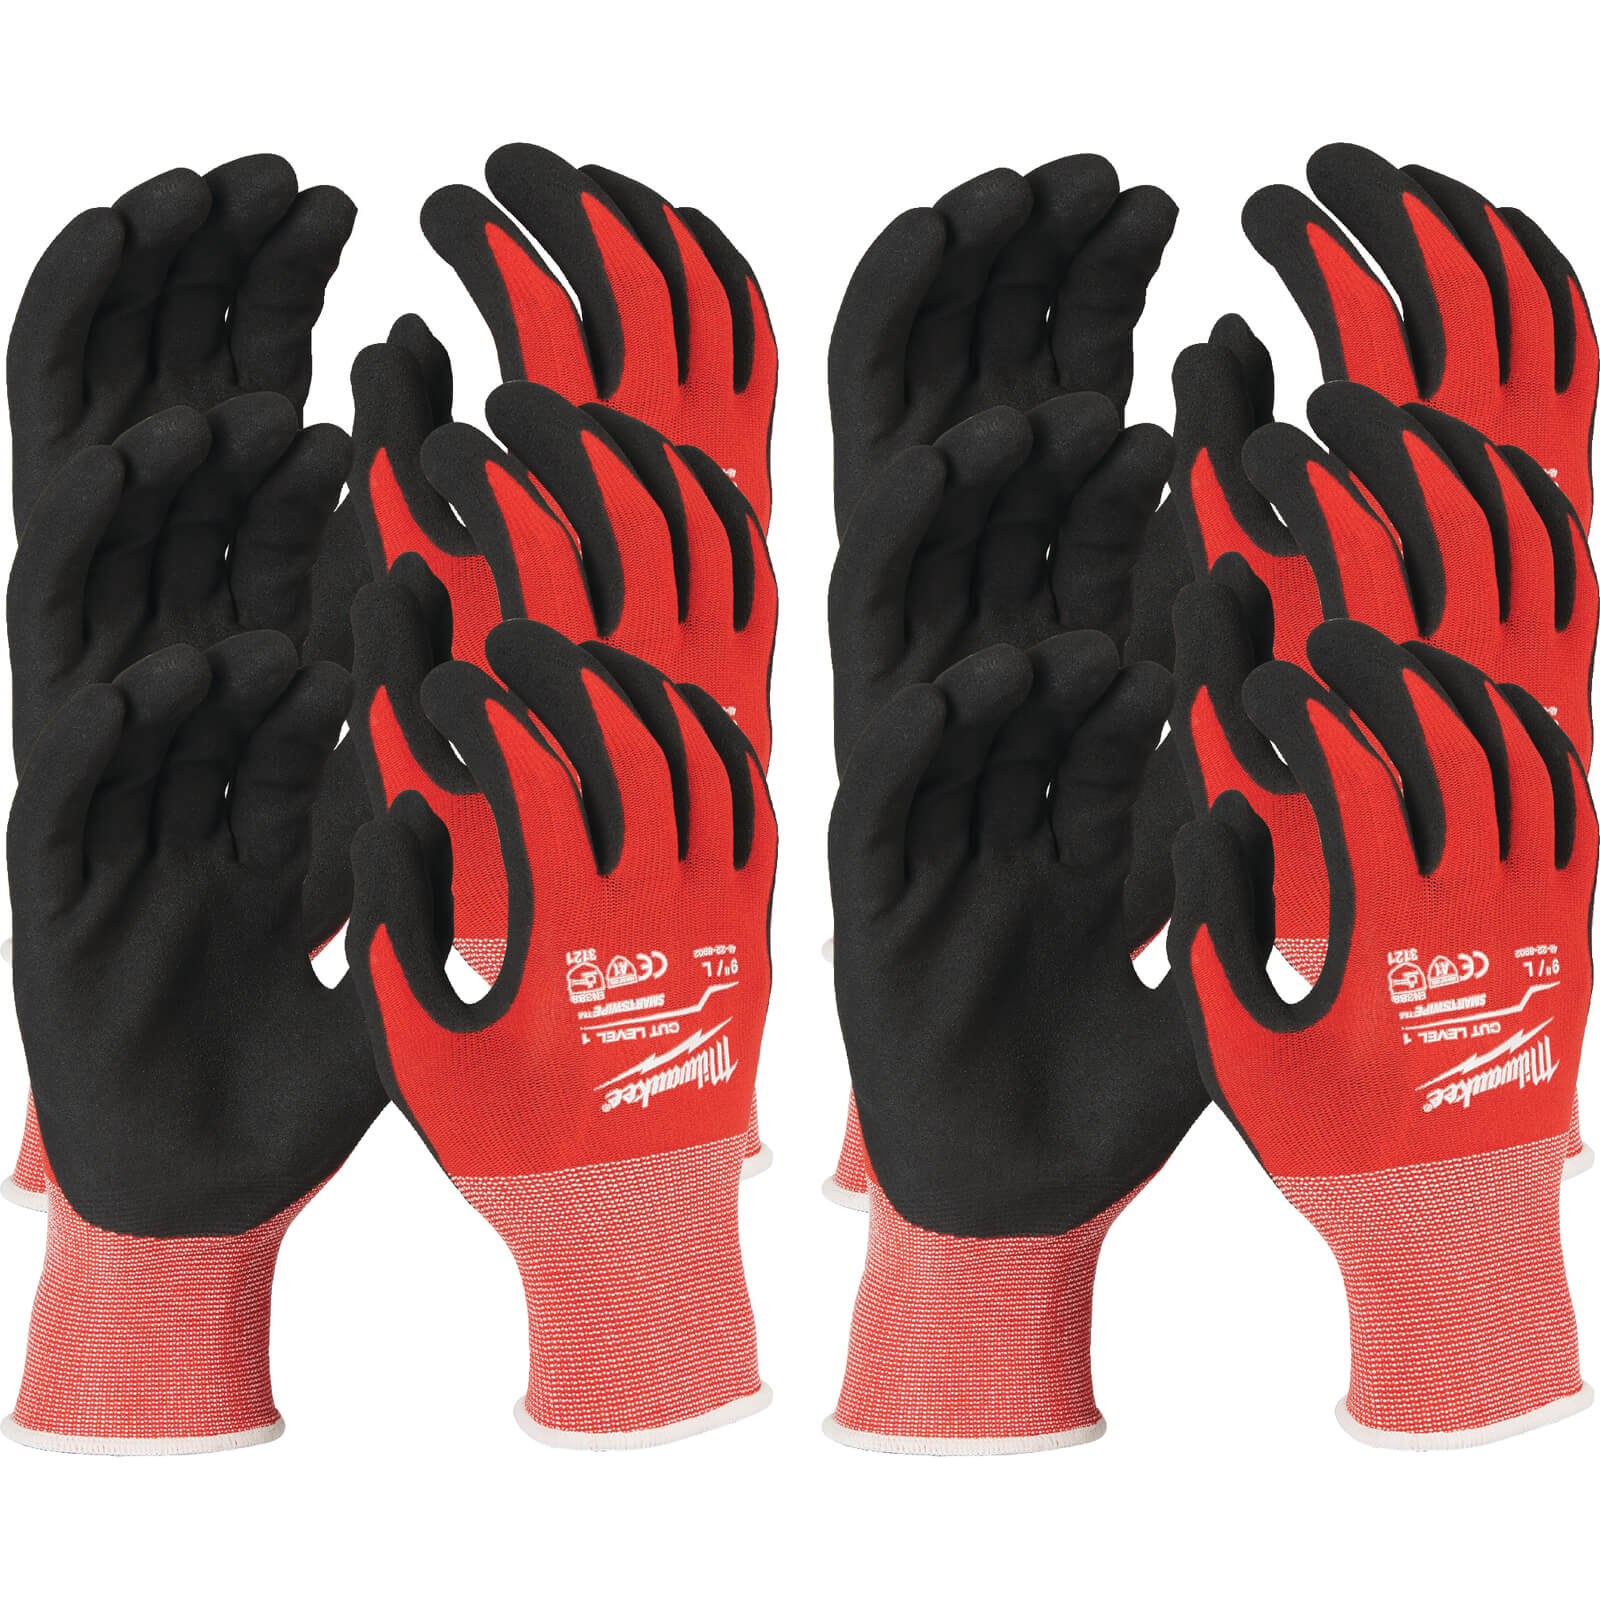 Image of Milwaukee Cut Level 1 Dipped Work Gloves Black / Red L Pack of 12